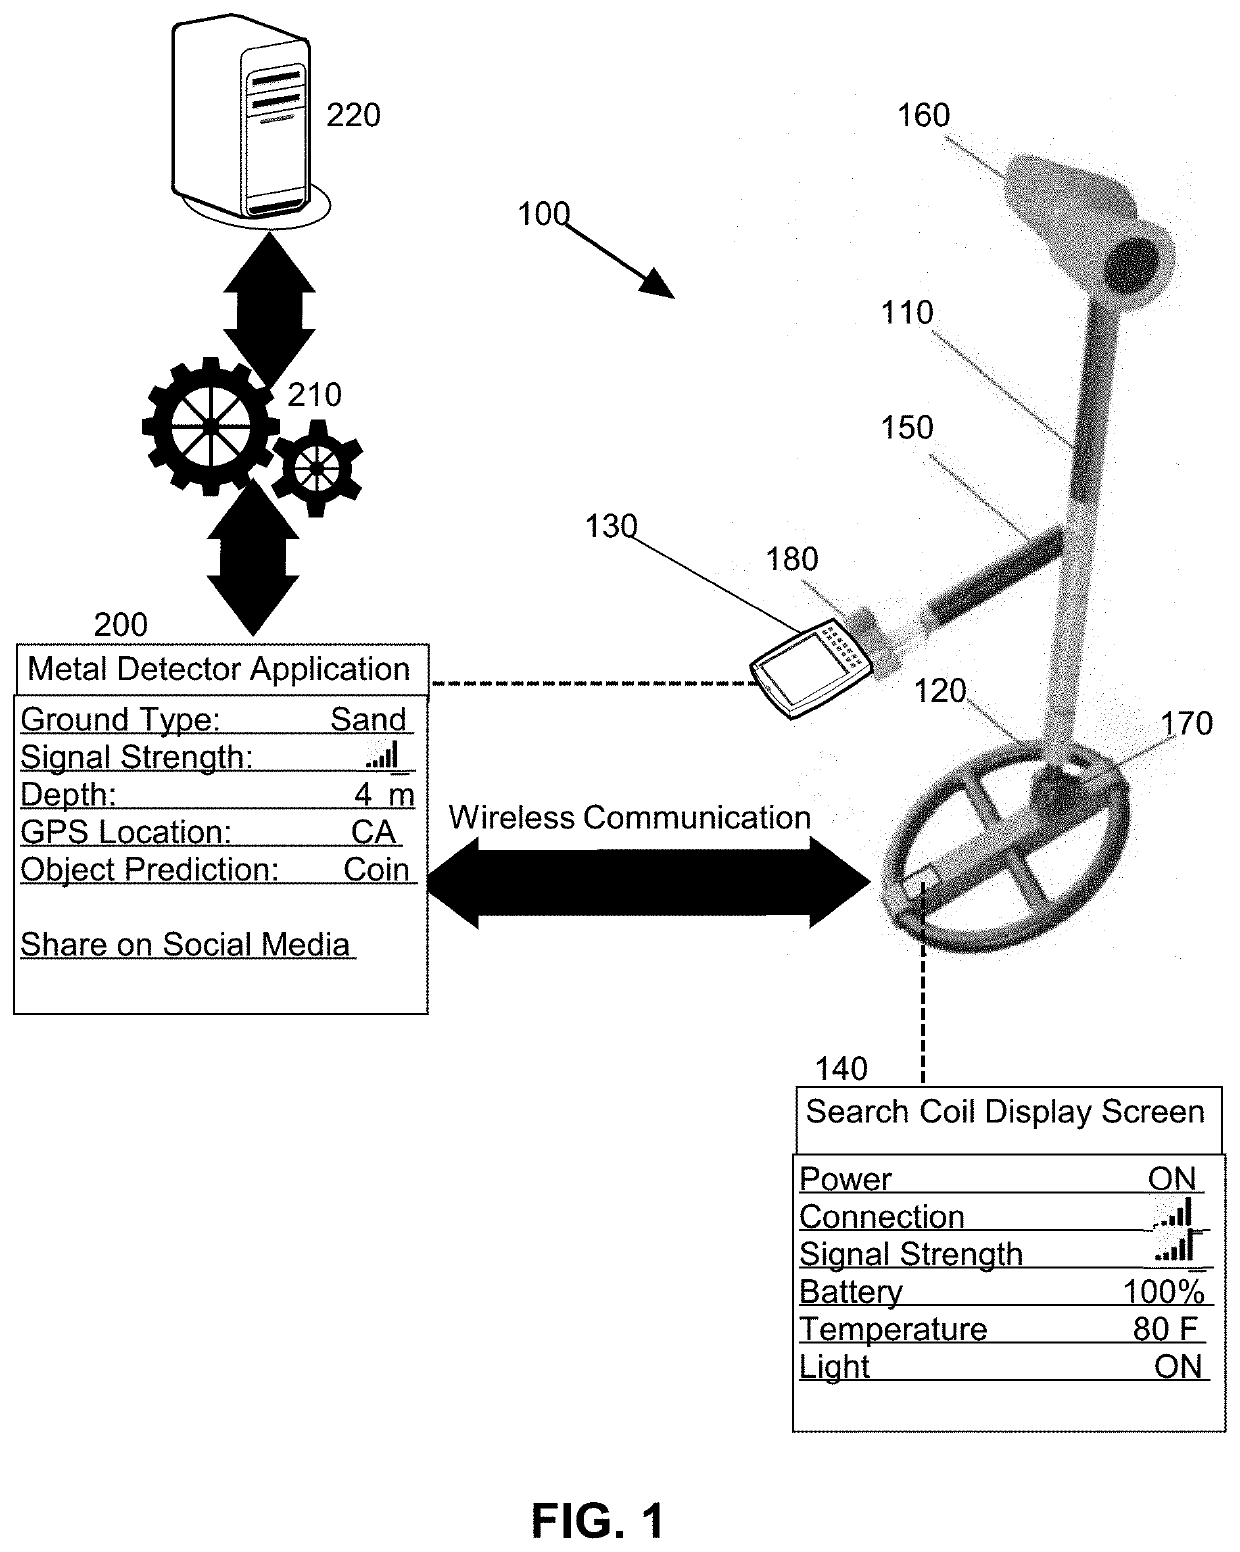 Mobile Device Integration of a Portable Metal Detector